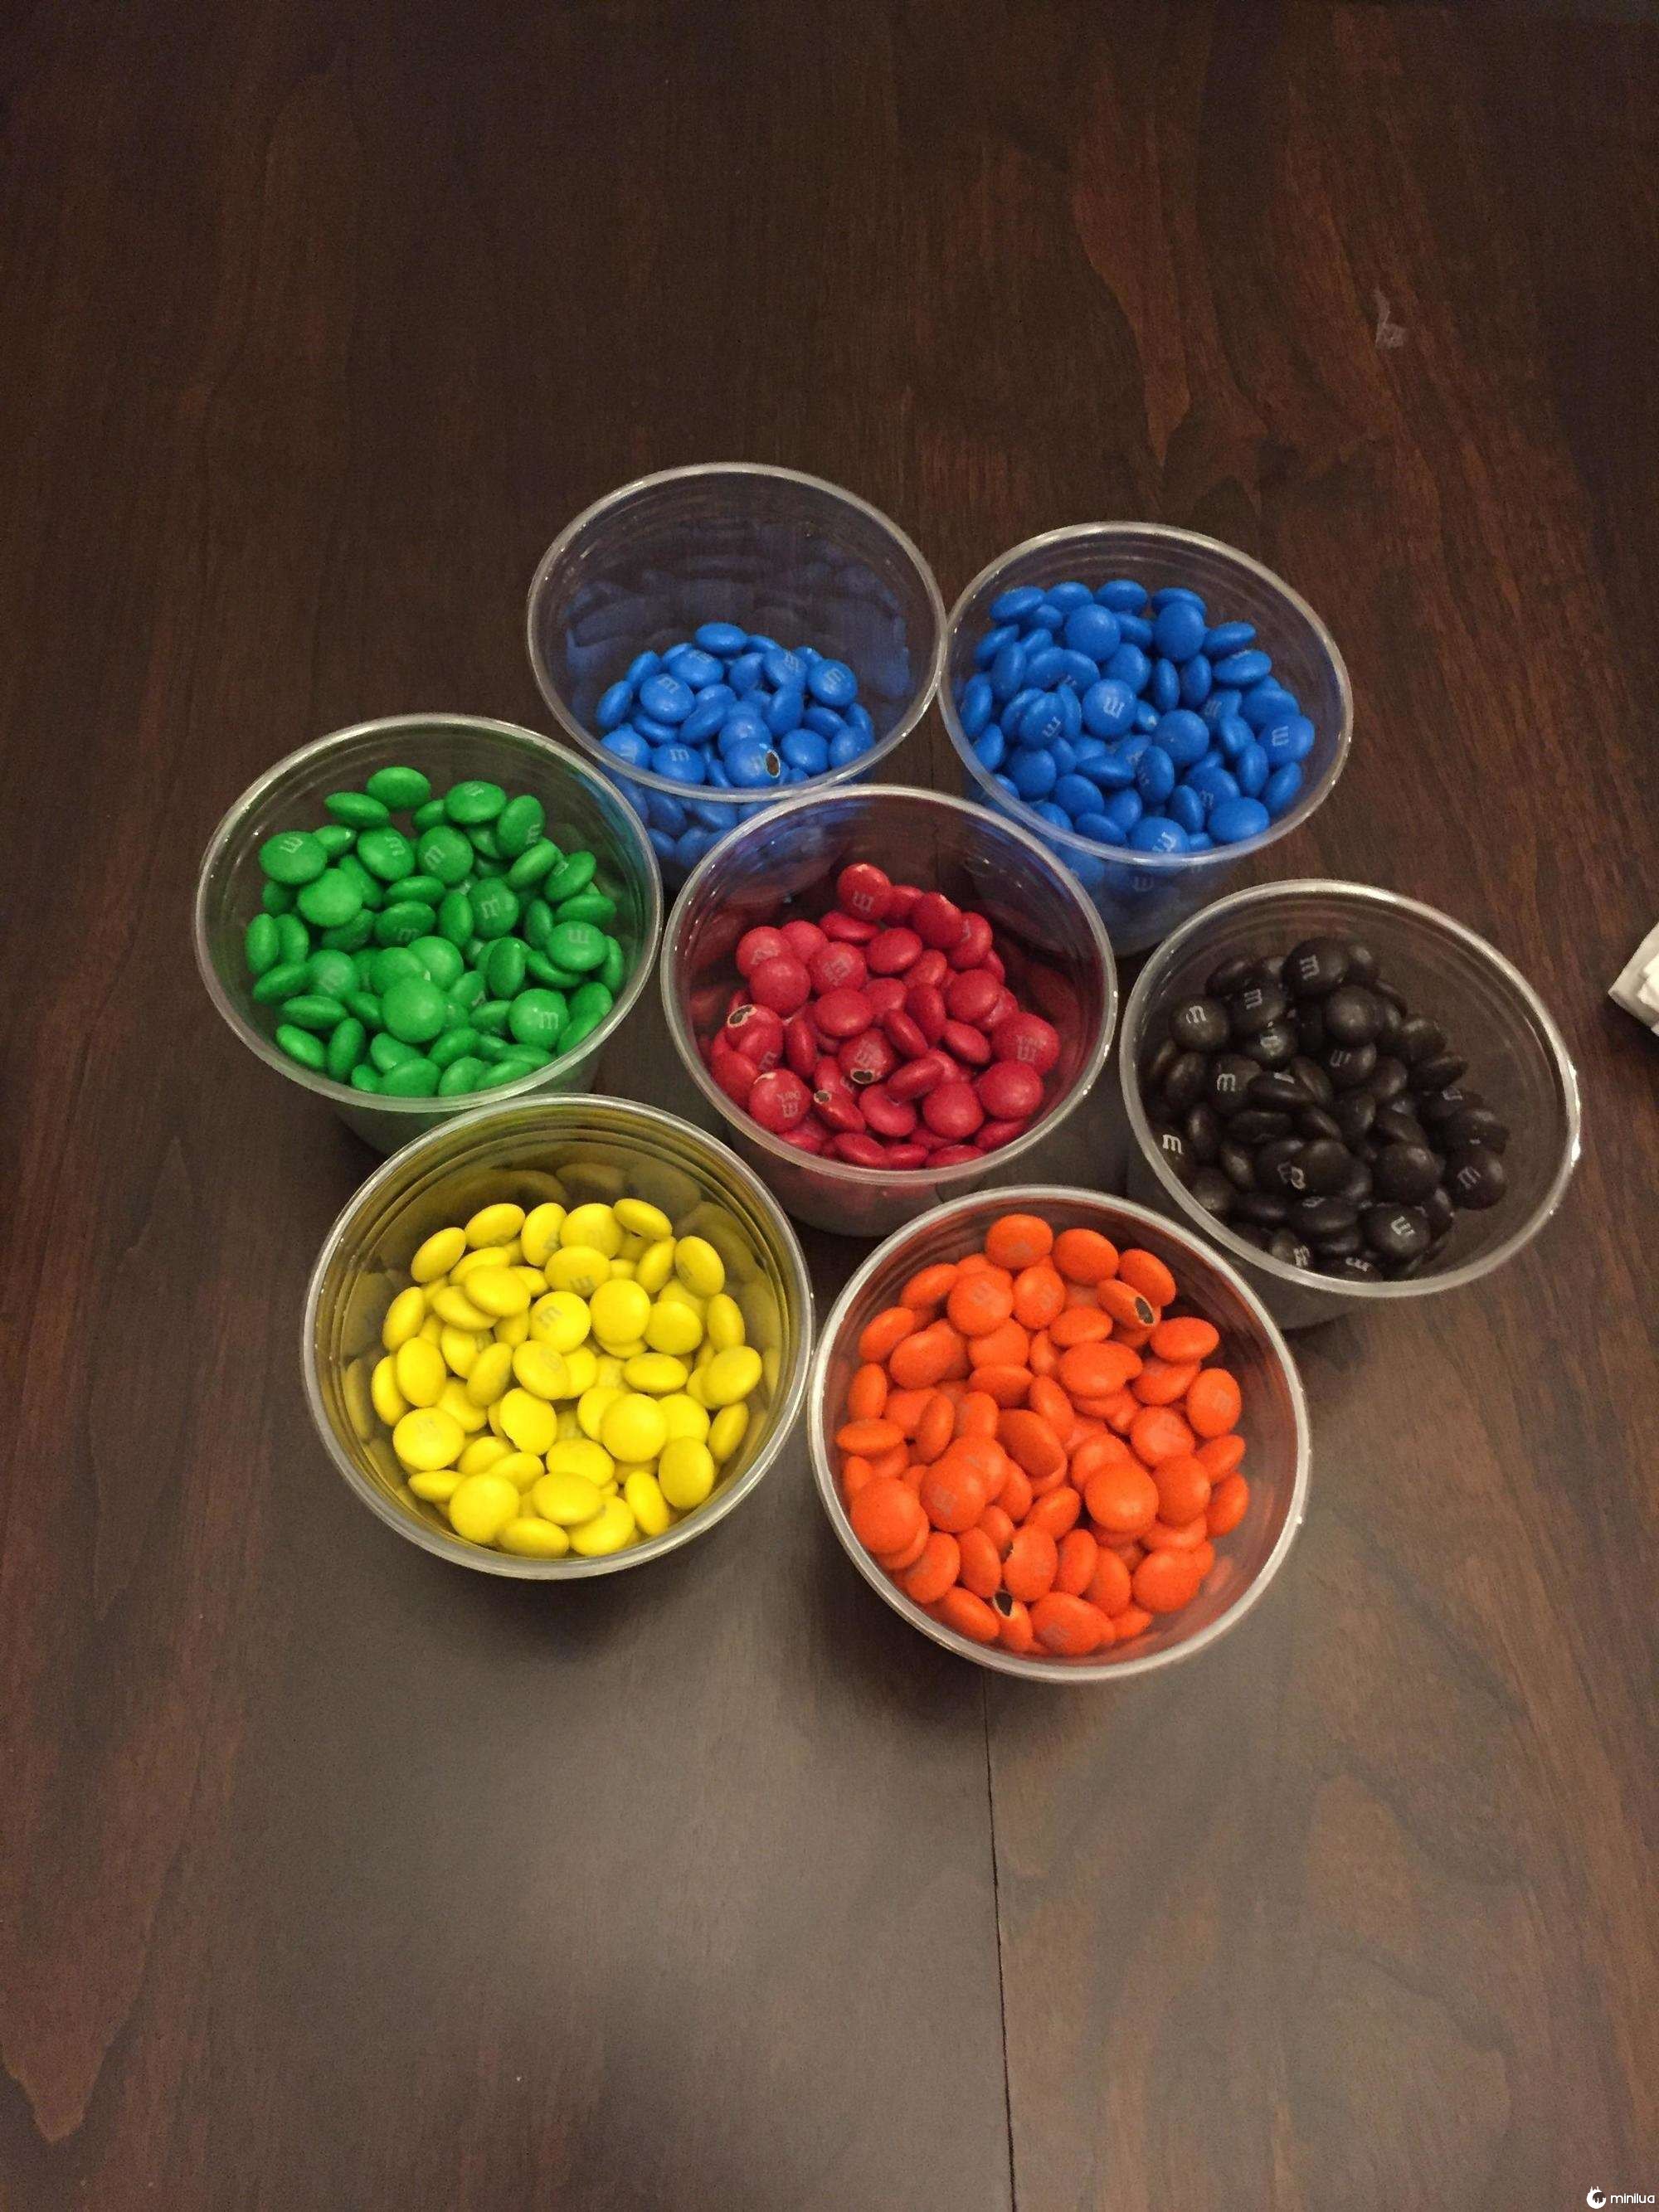 Six bags of M&Ms is all it took to create this color-coded labor of love for visual perfection.